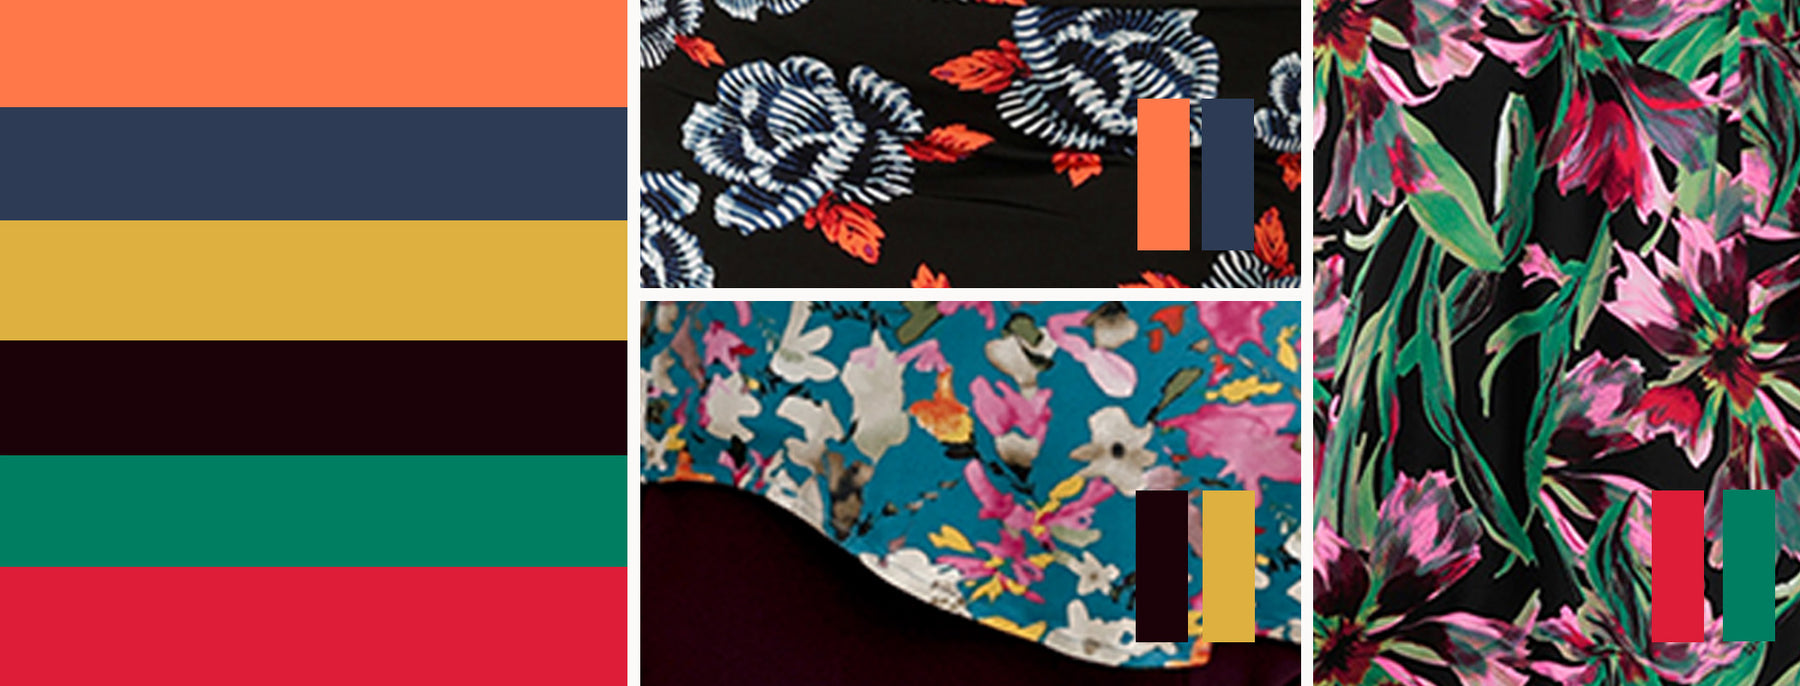 Complementary colour palettes for women's fashion, the images shows 3 floral print swatches in blue and orange, red and green and purple and yellow, used to make women's skirts, dresses and tops.